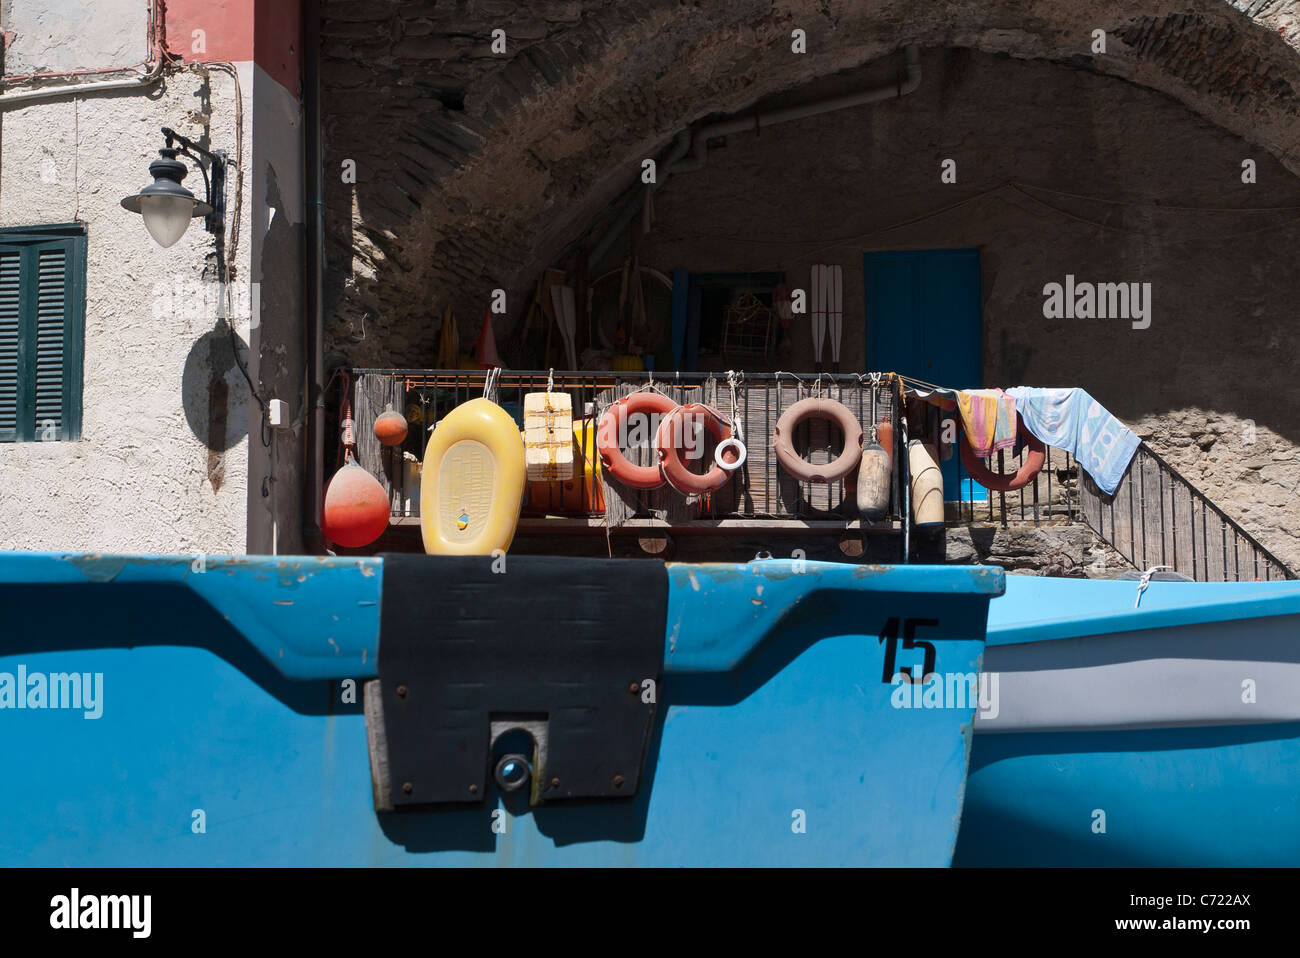 Boating accessories such as boat bumpers and life preservers hang from a railing with boats in foreground in Riomaggiore, Italy. Stock Photo